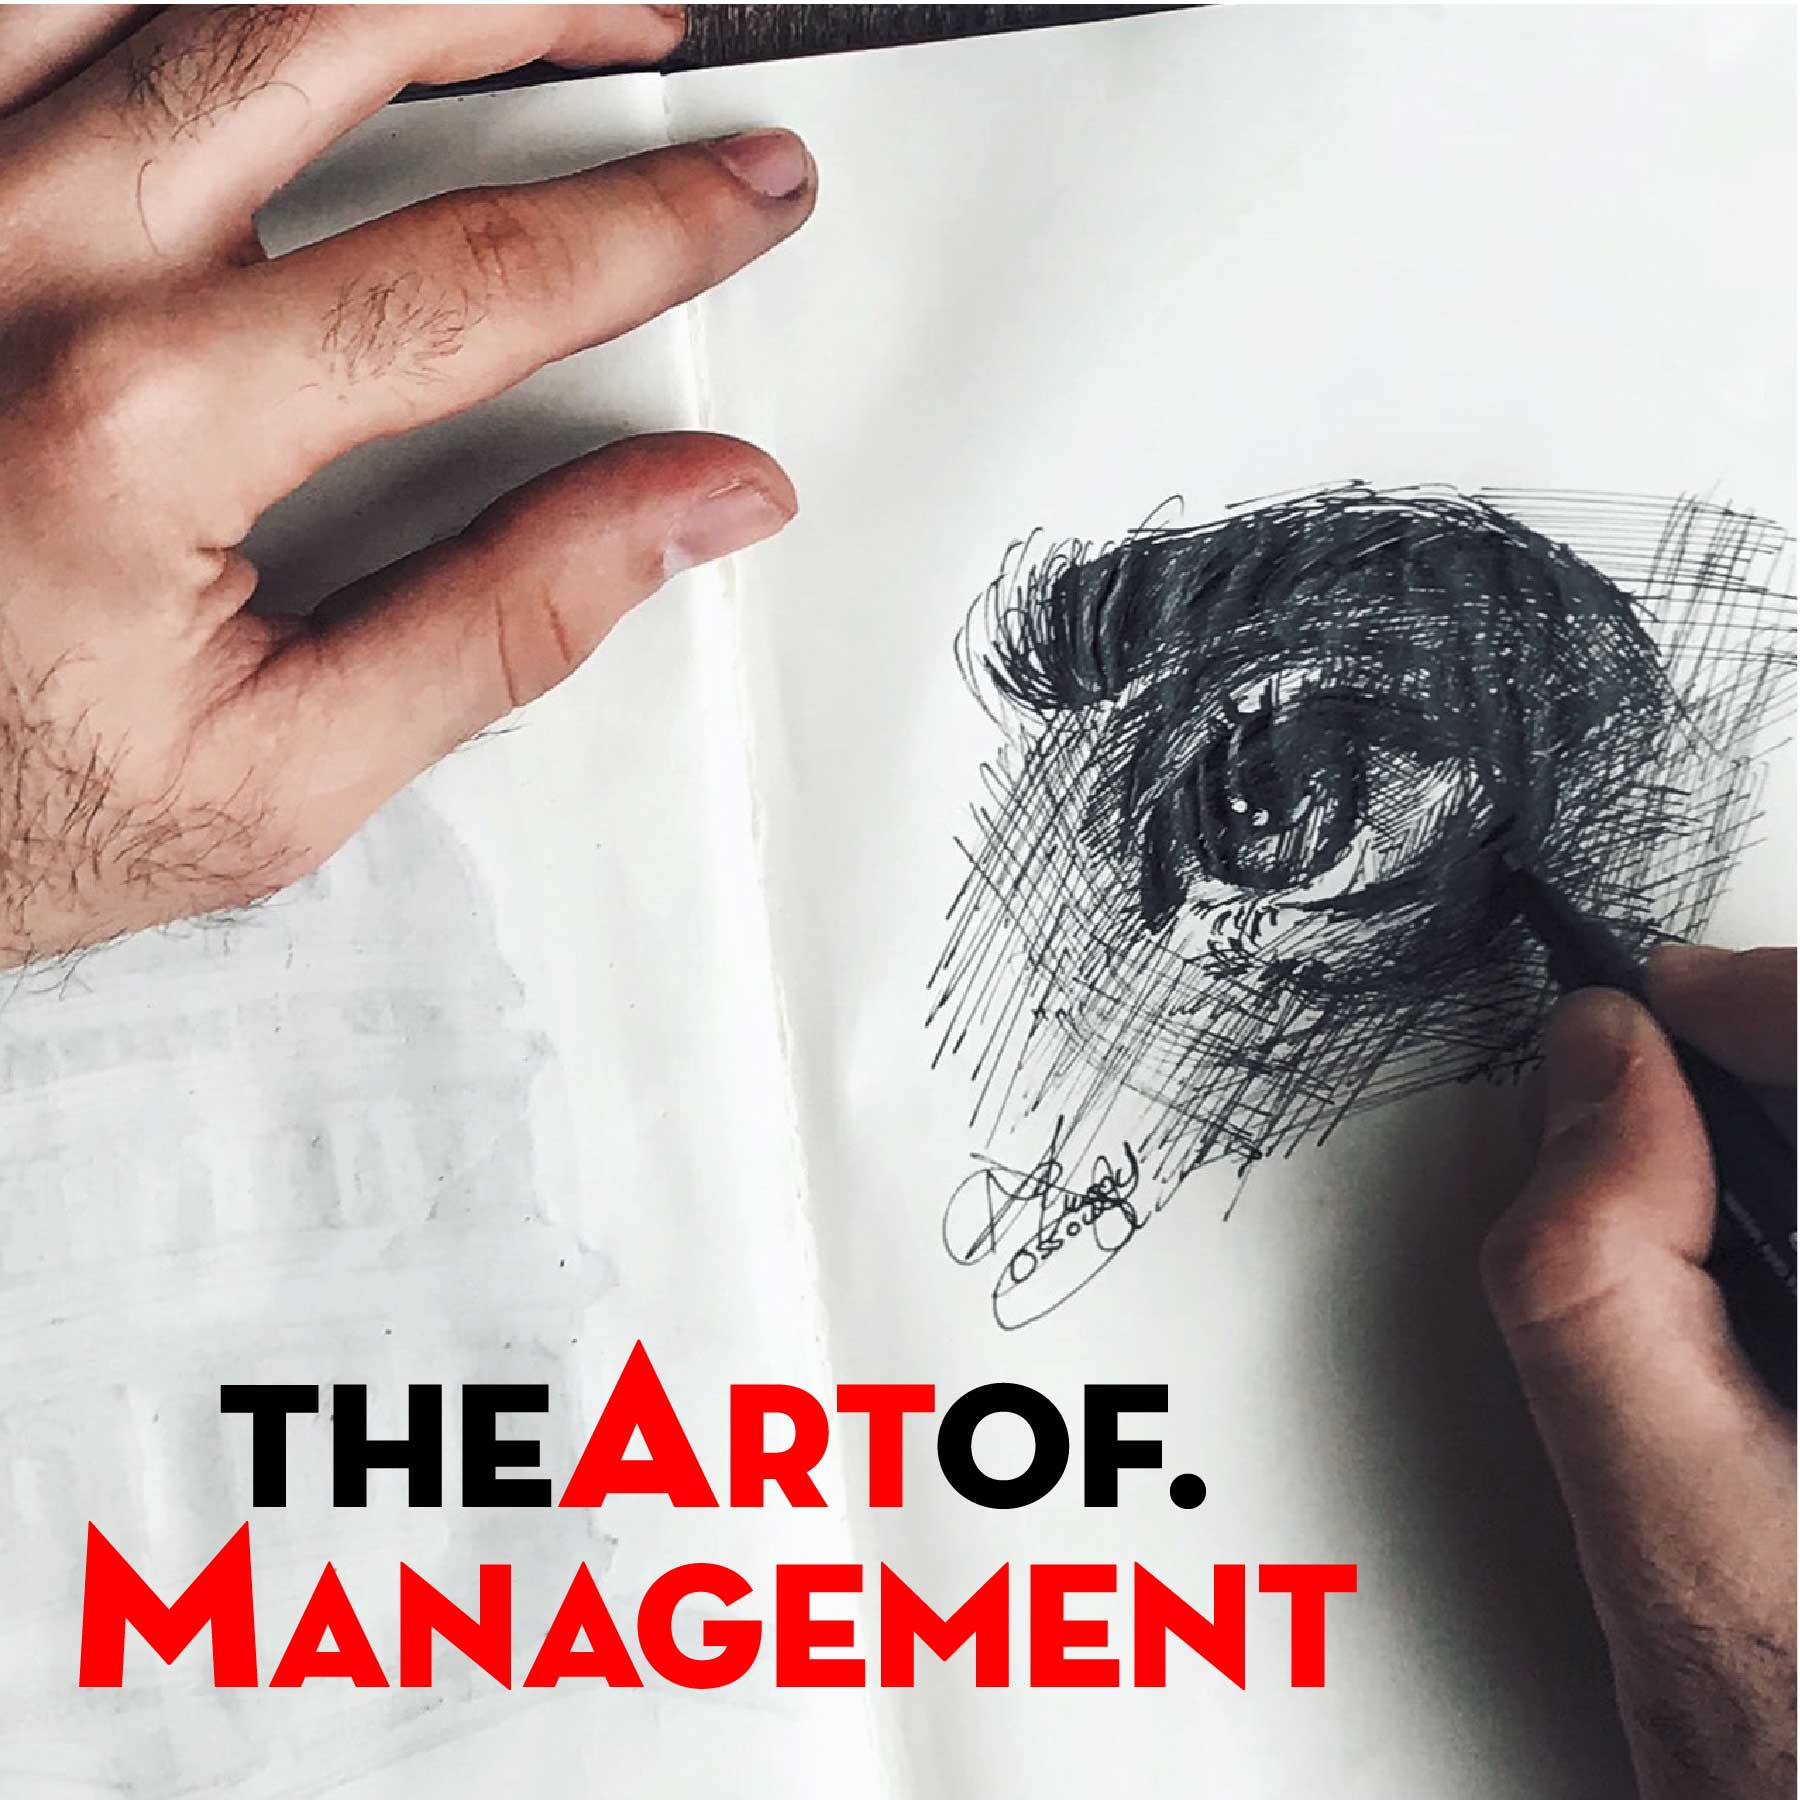 The Art of Management